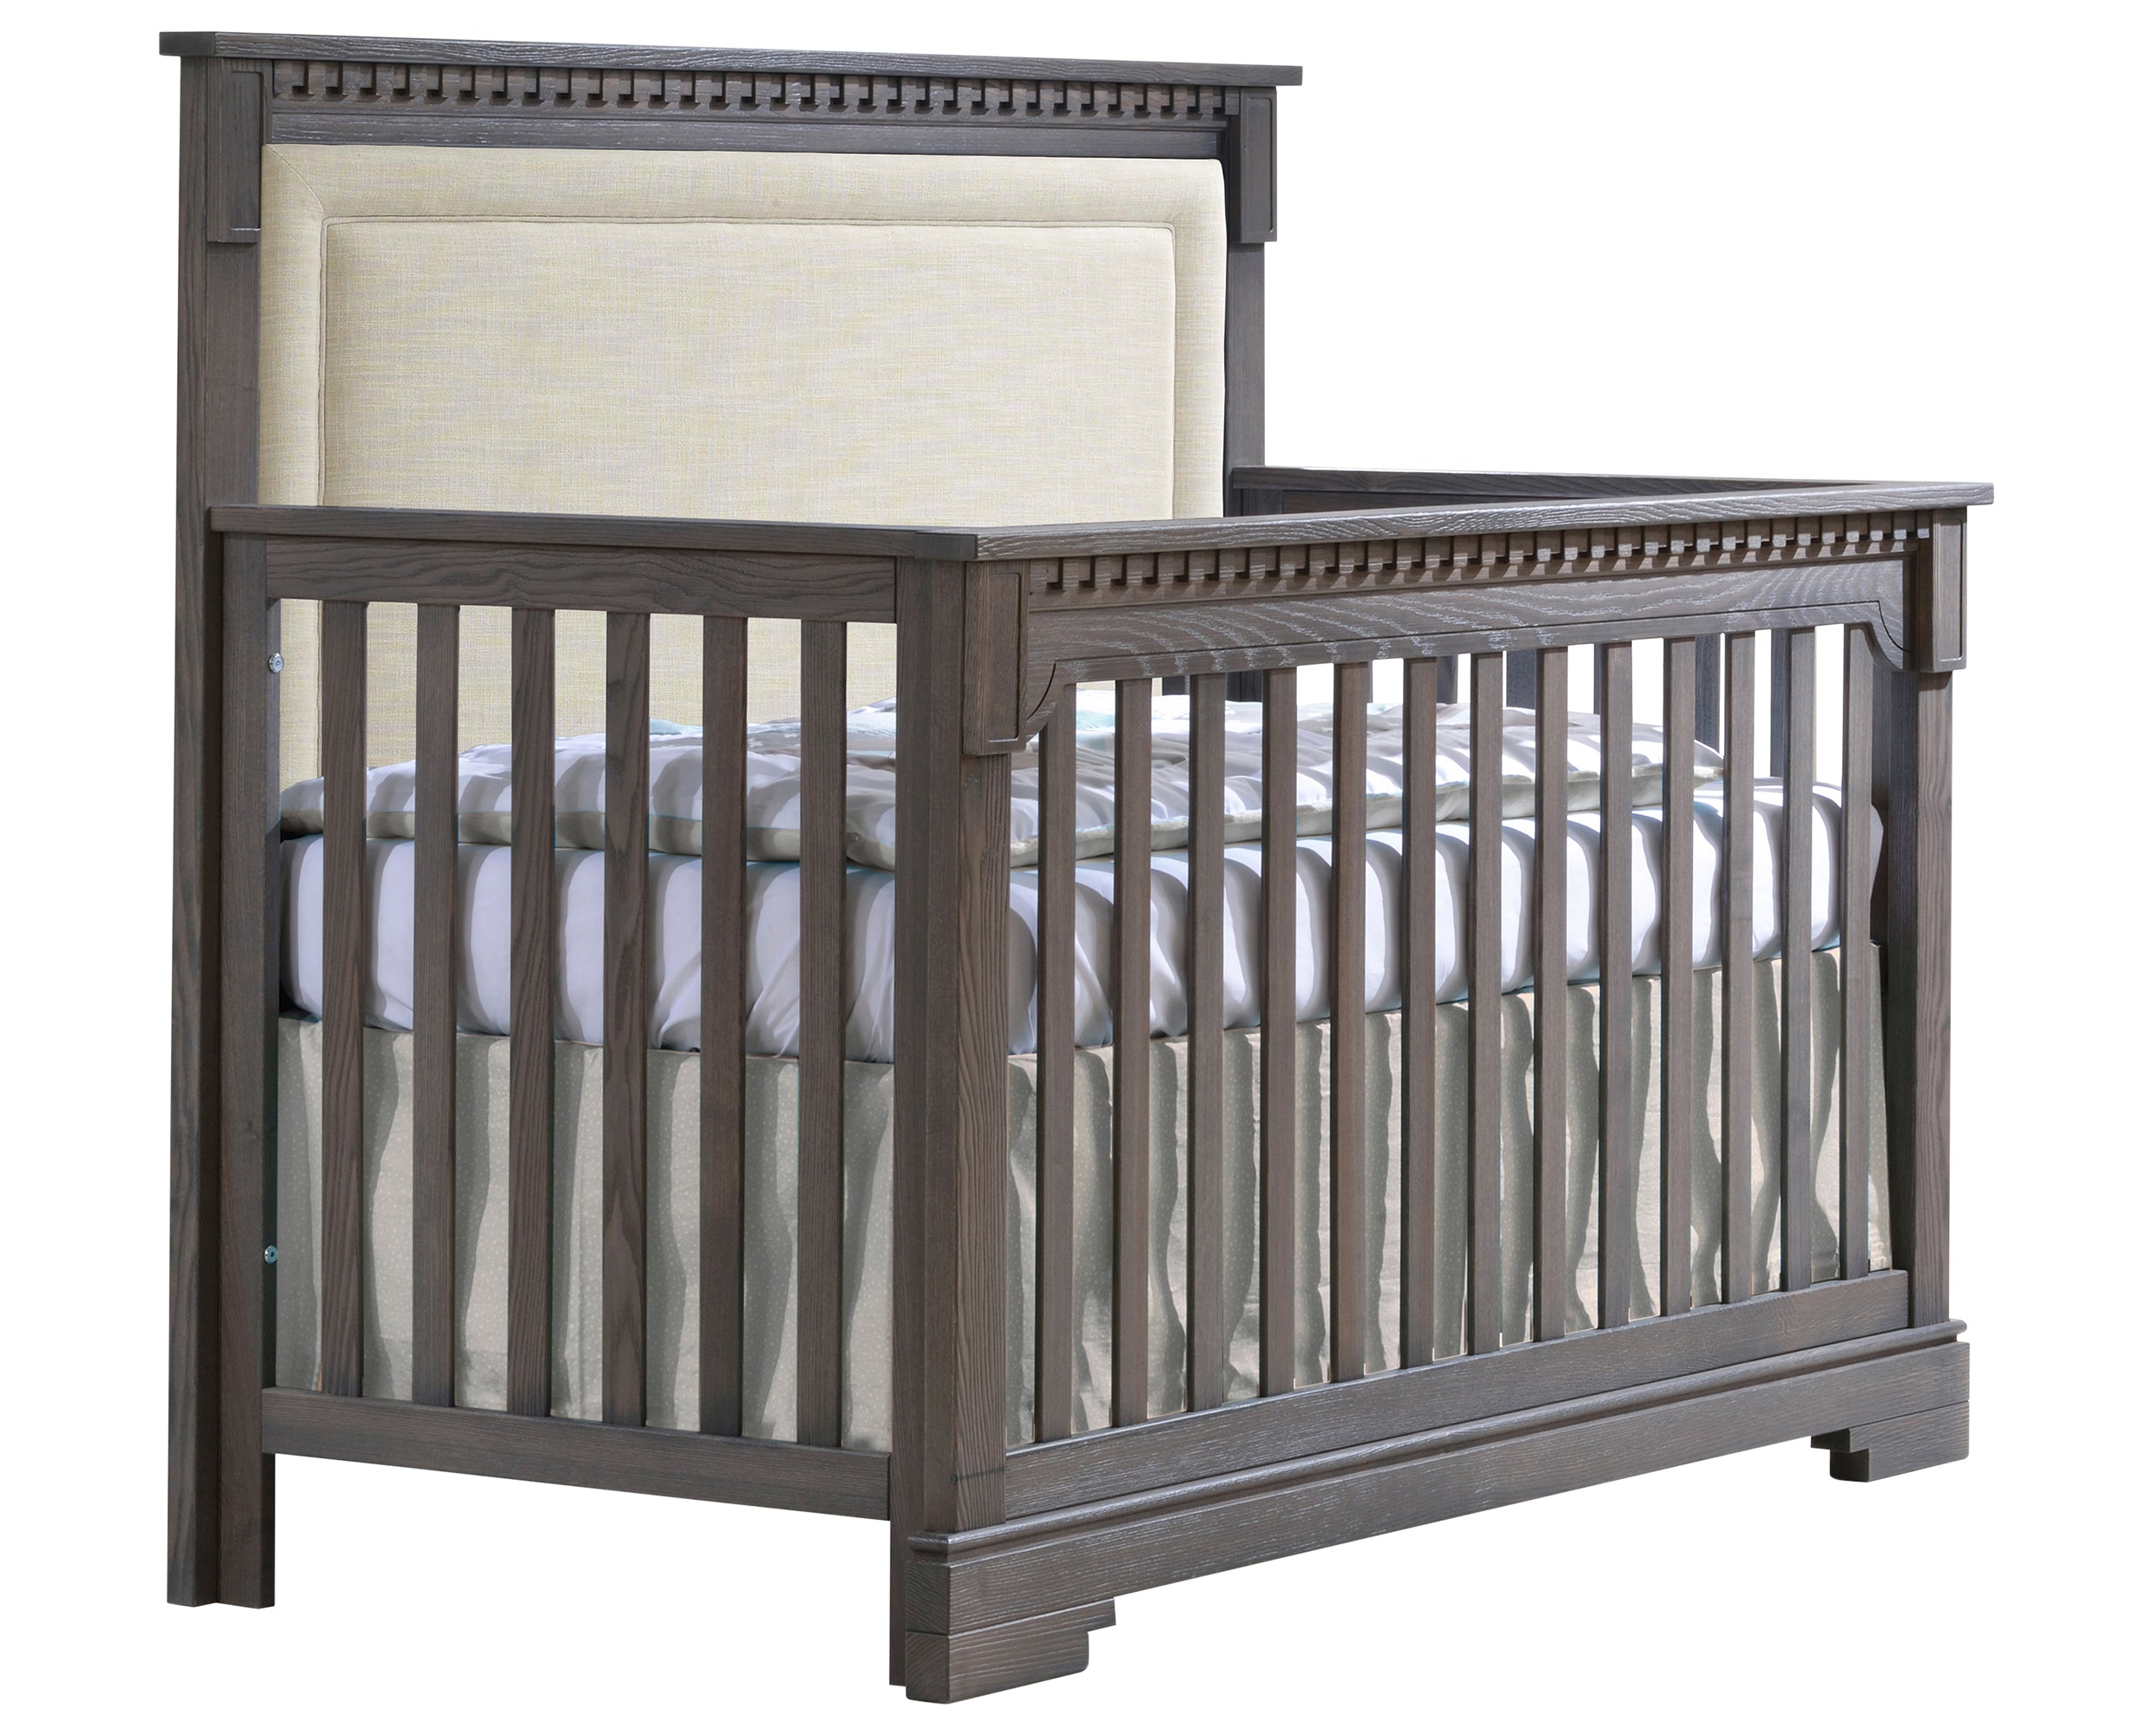 Grigio Brushed Oak with Talc Fabric | Ithaca 5-in-1 Convertible Crib w/Upholstered Headboard Panel | Valley Ridge Furniture